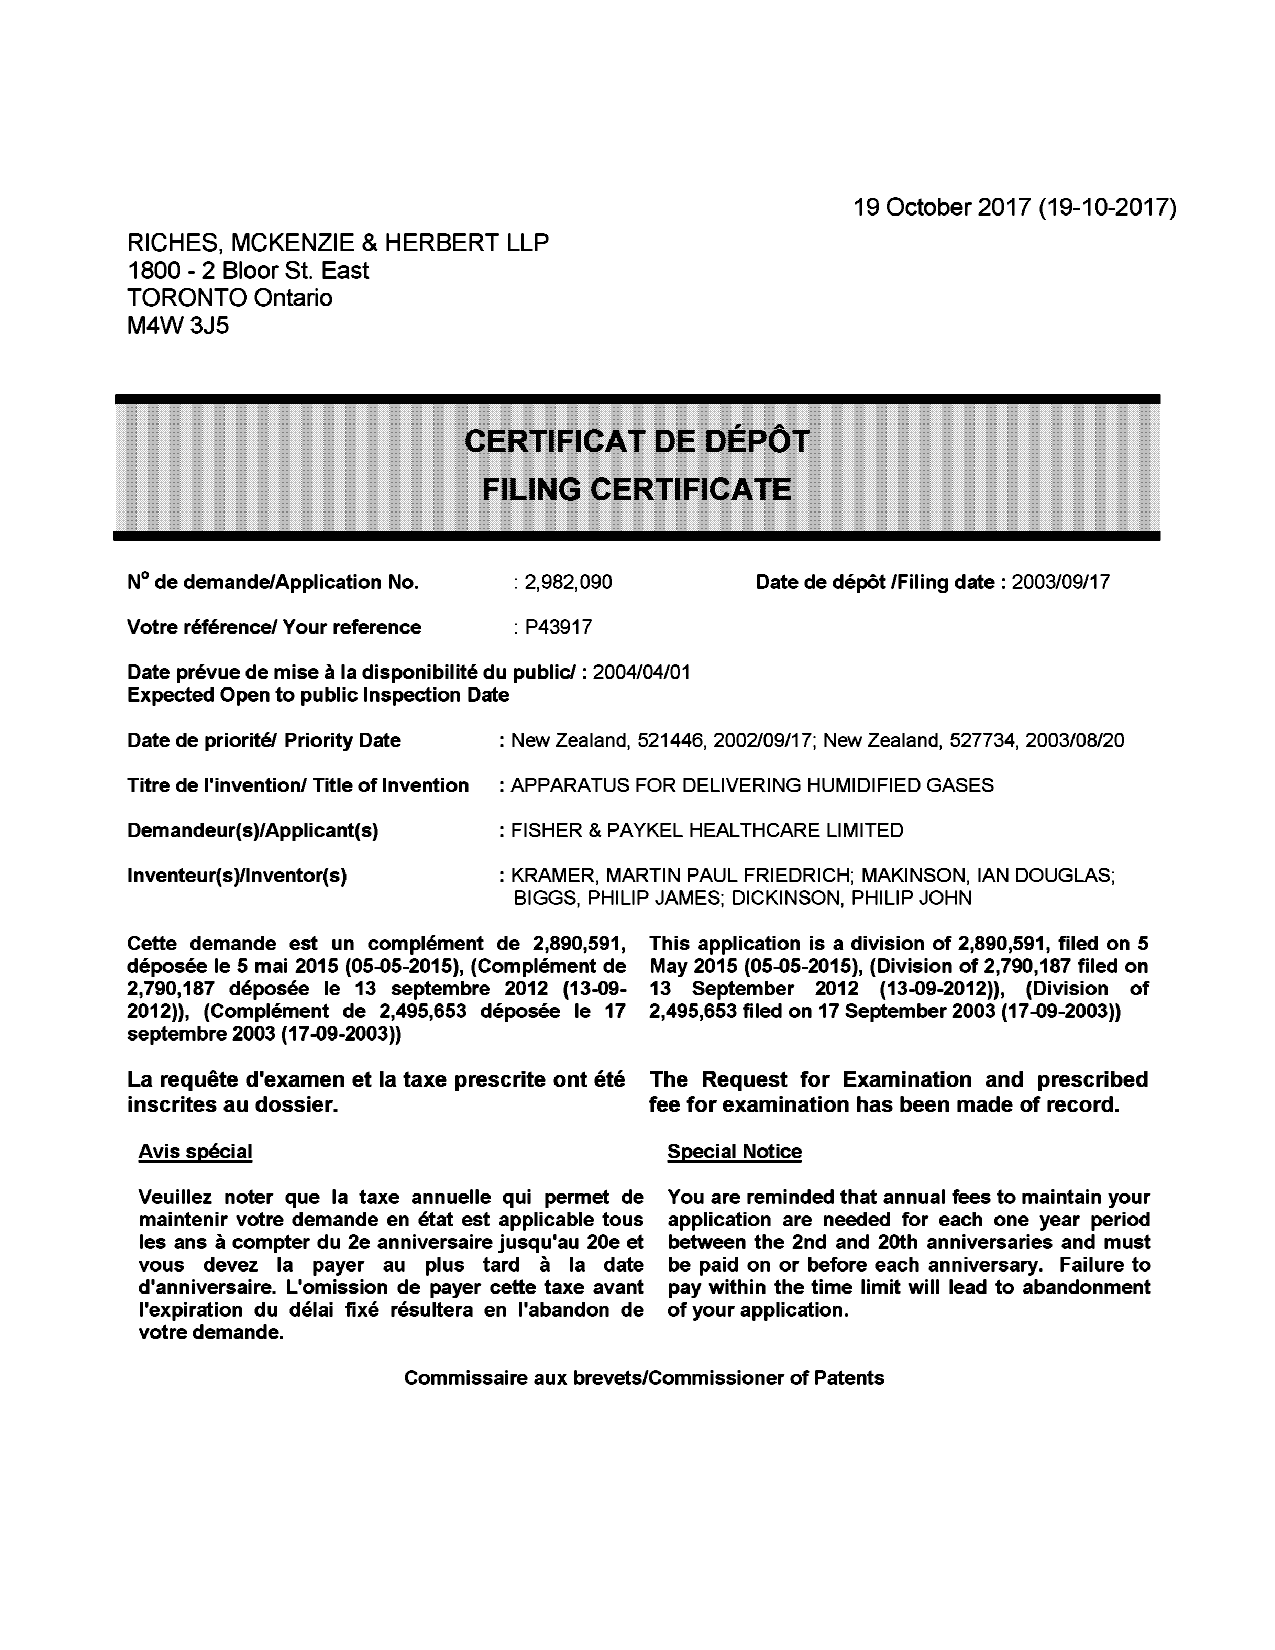 Canadian Patent Document 2982090. Divisional - Filing Certificate 20171019. Image 1 of 1